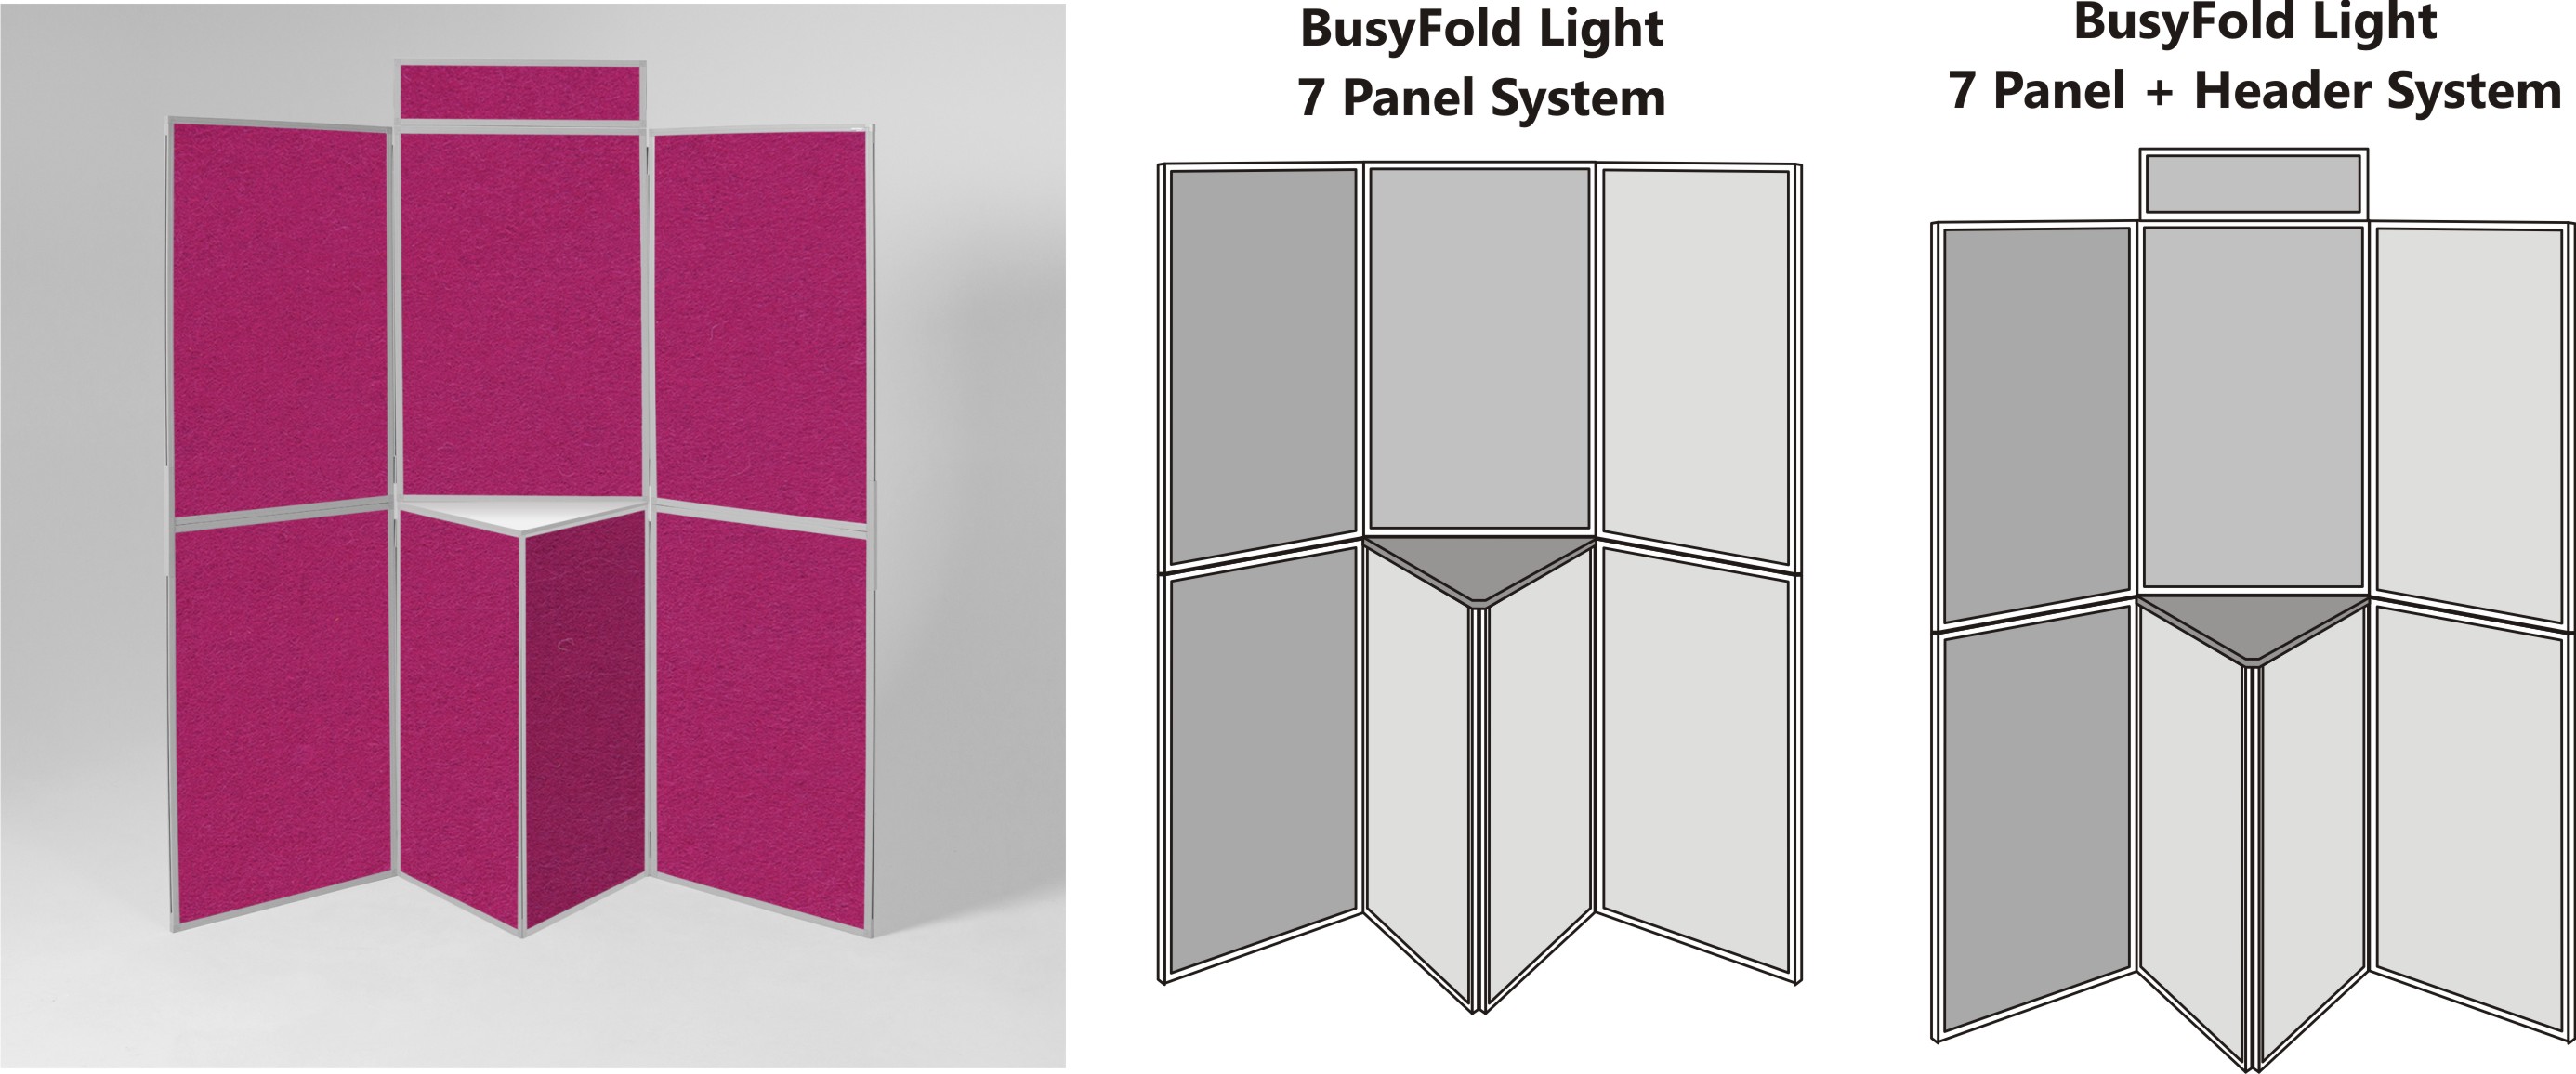 BusyFold Light 7 Panel Display System